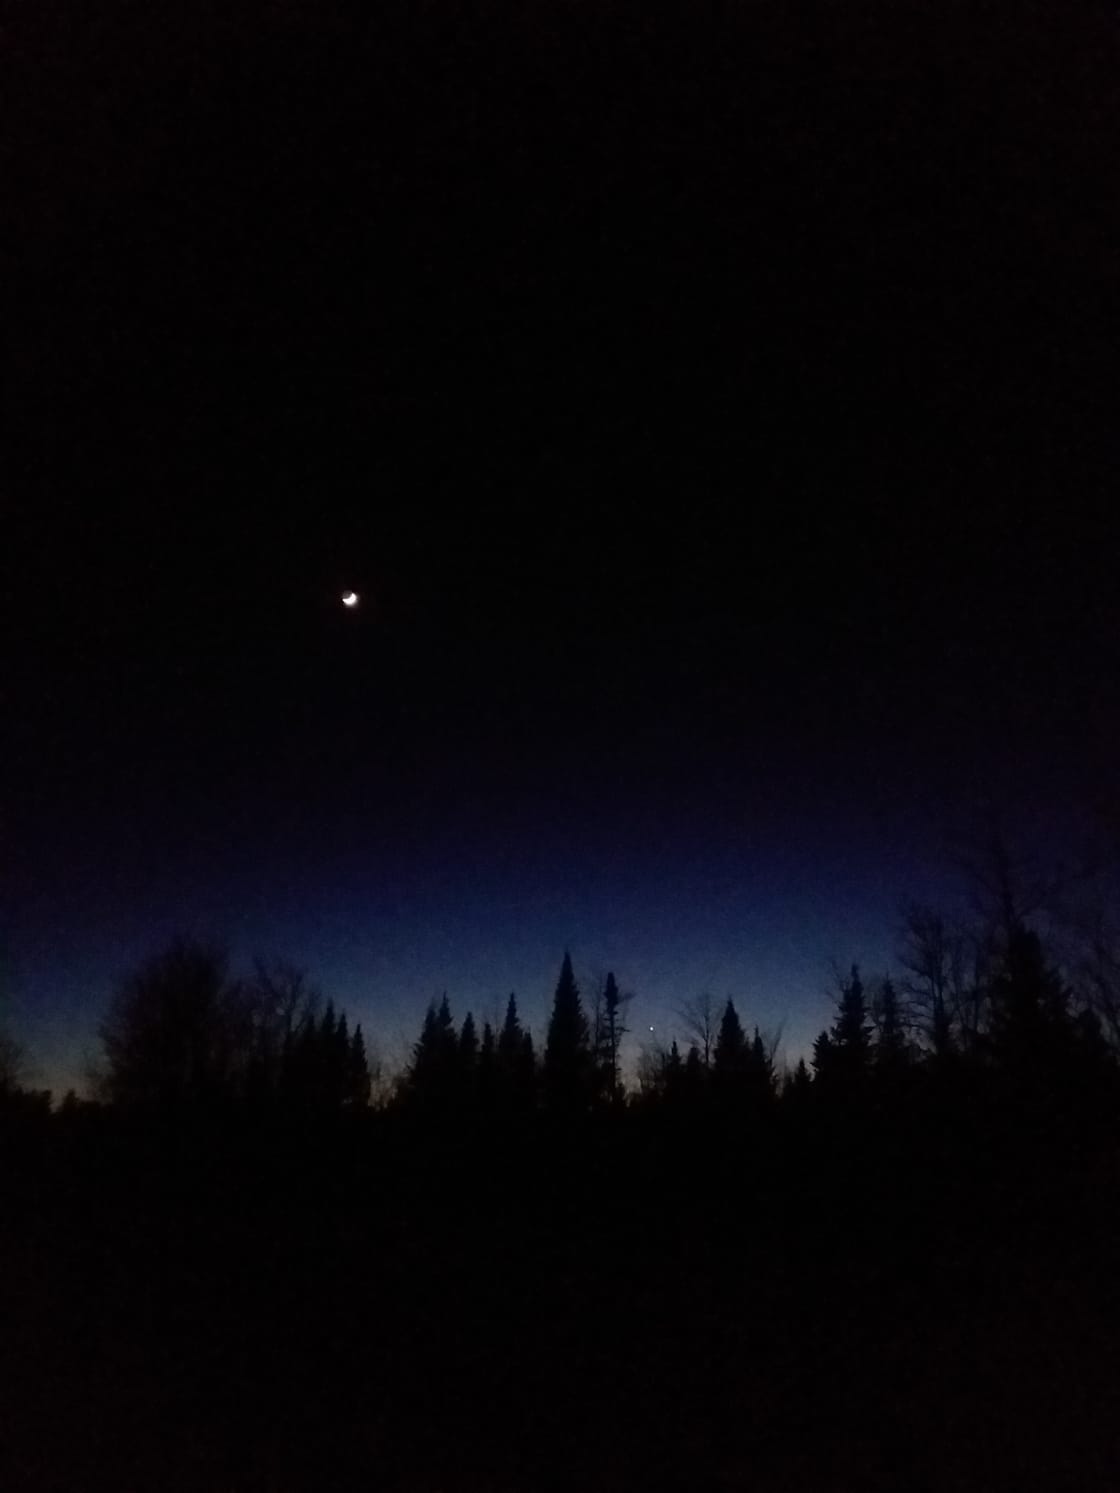 A crescent moon in the sky and Venus down low in the trees.